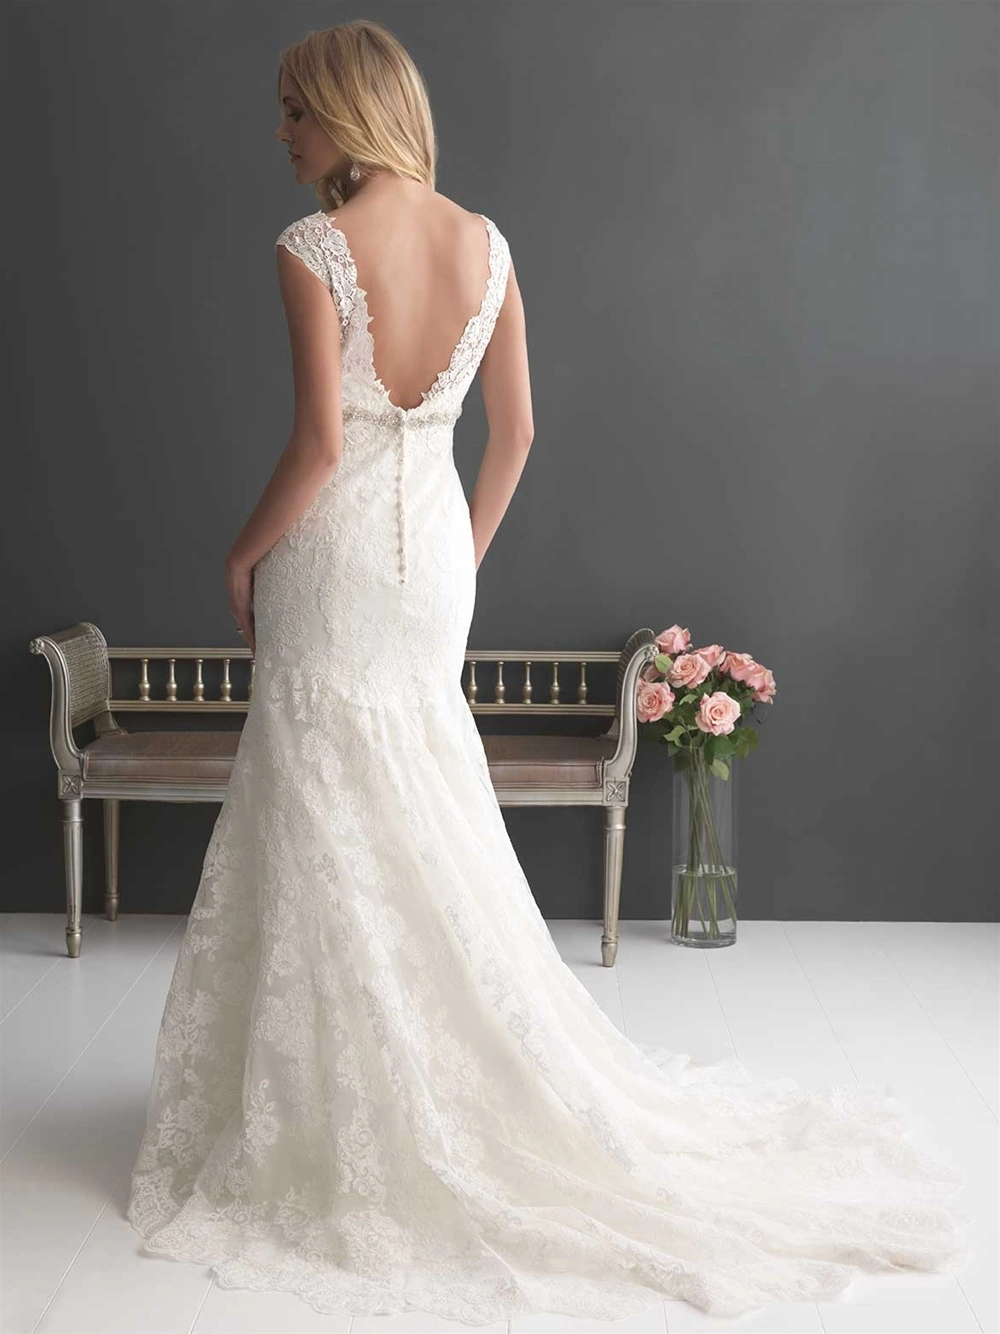 Sexy Backless Lace Wedding Dress Crystal Empire Wedding Bridal Gown Lace Evening Dress Wedding Gowns